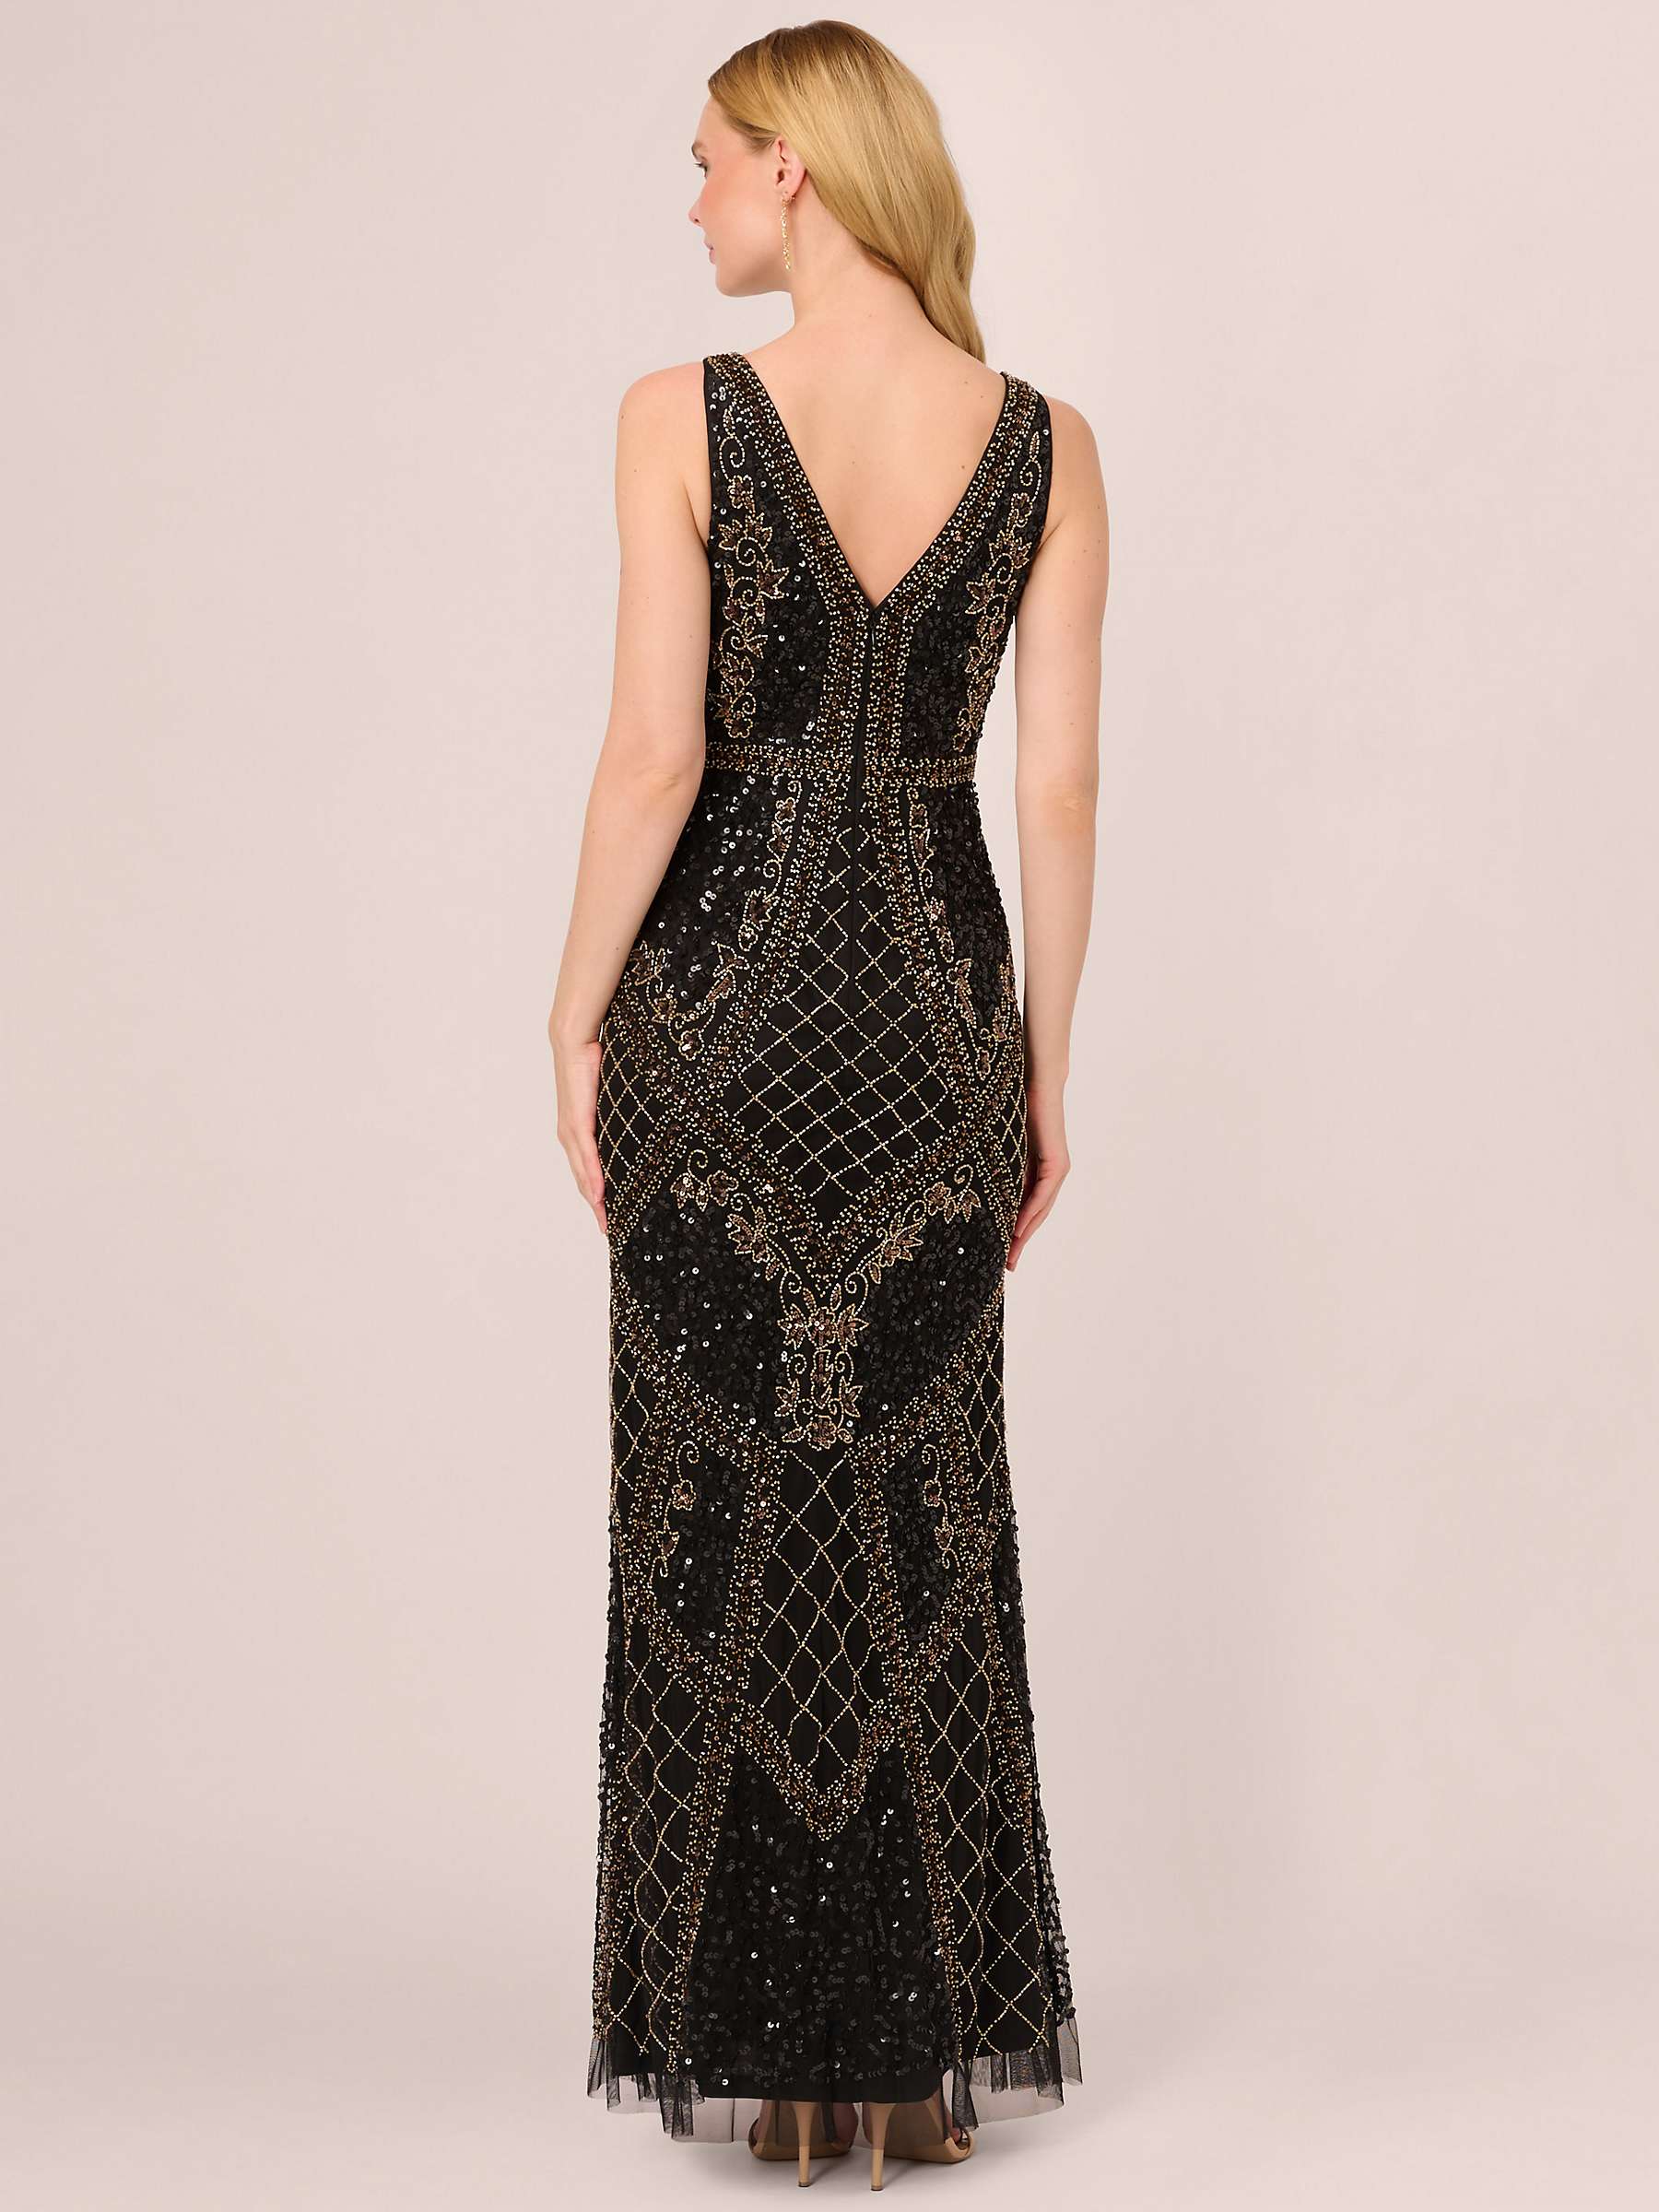 Buy Adrianna Papell Beaded Mesh Maxi Dress, Black/Gold Online at johnlewis.com